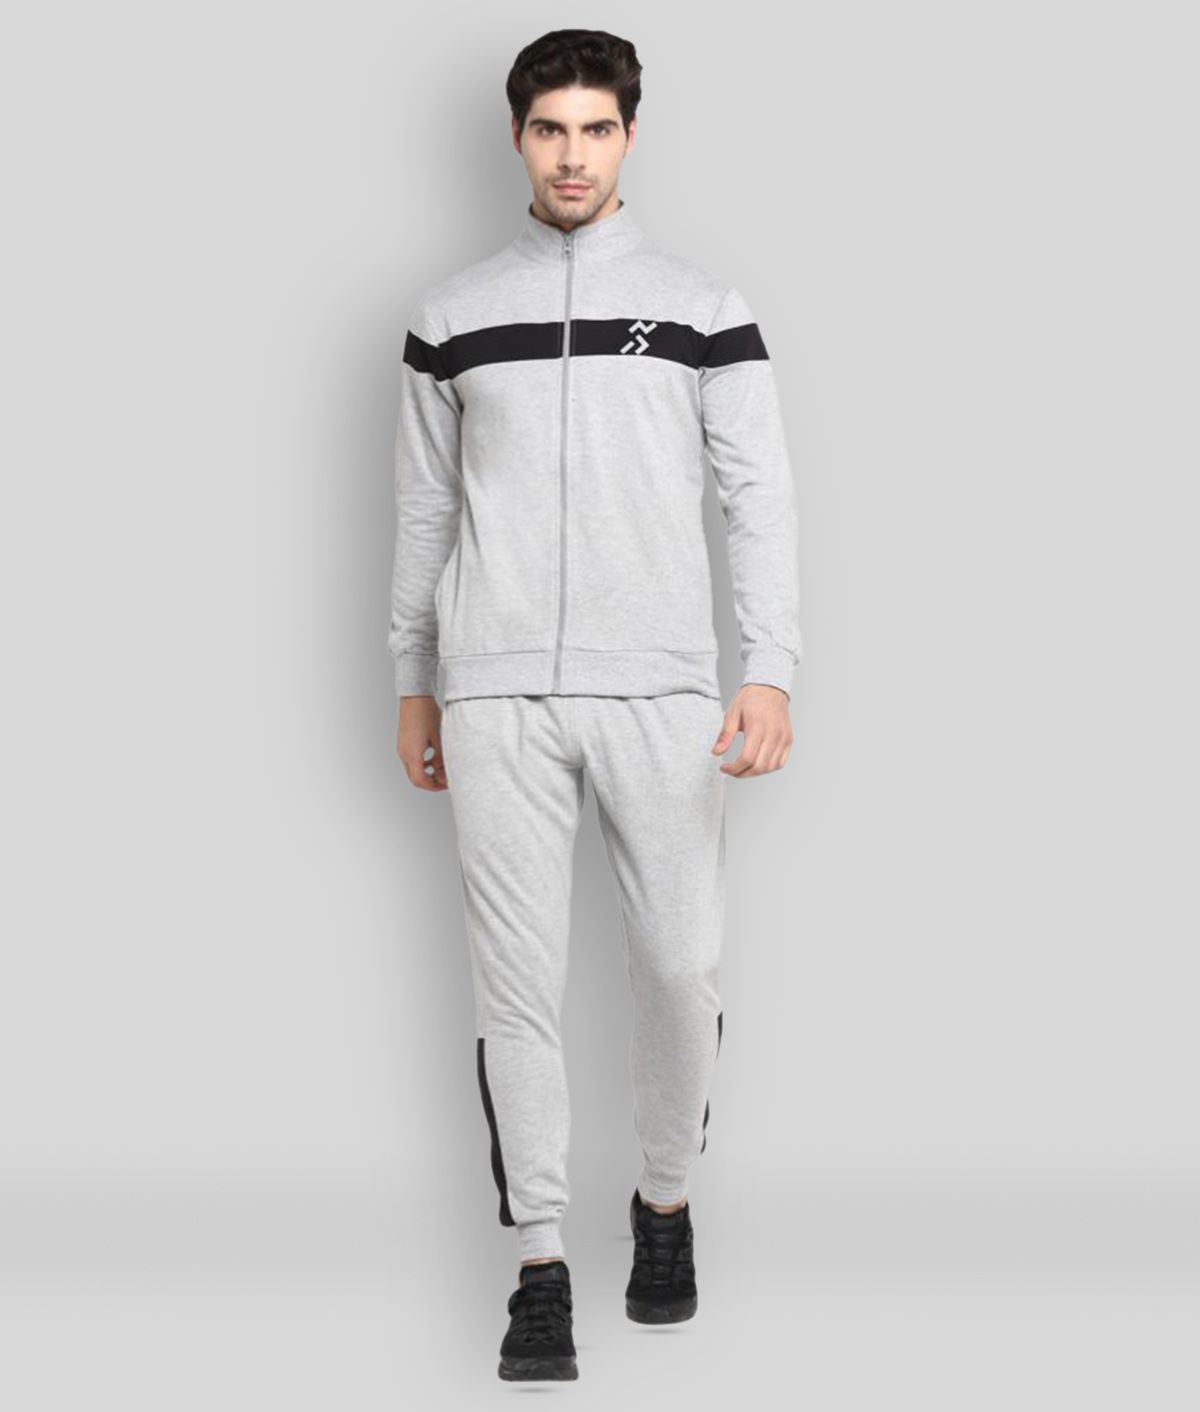     			OFF LIMITS - Light Grey Polyester Regular Fit Striped Men's Sports Tracksuit ( Pack of 1 )